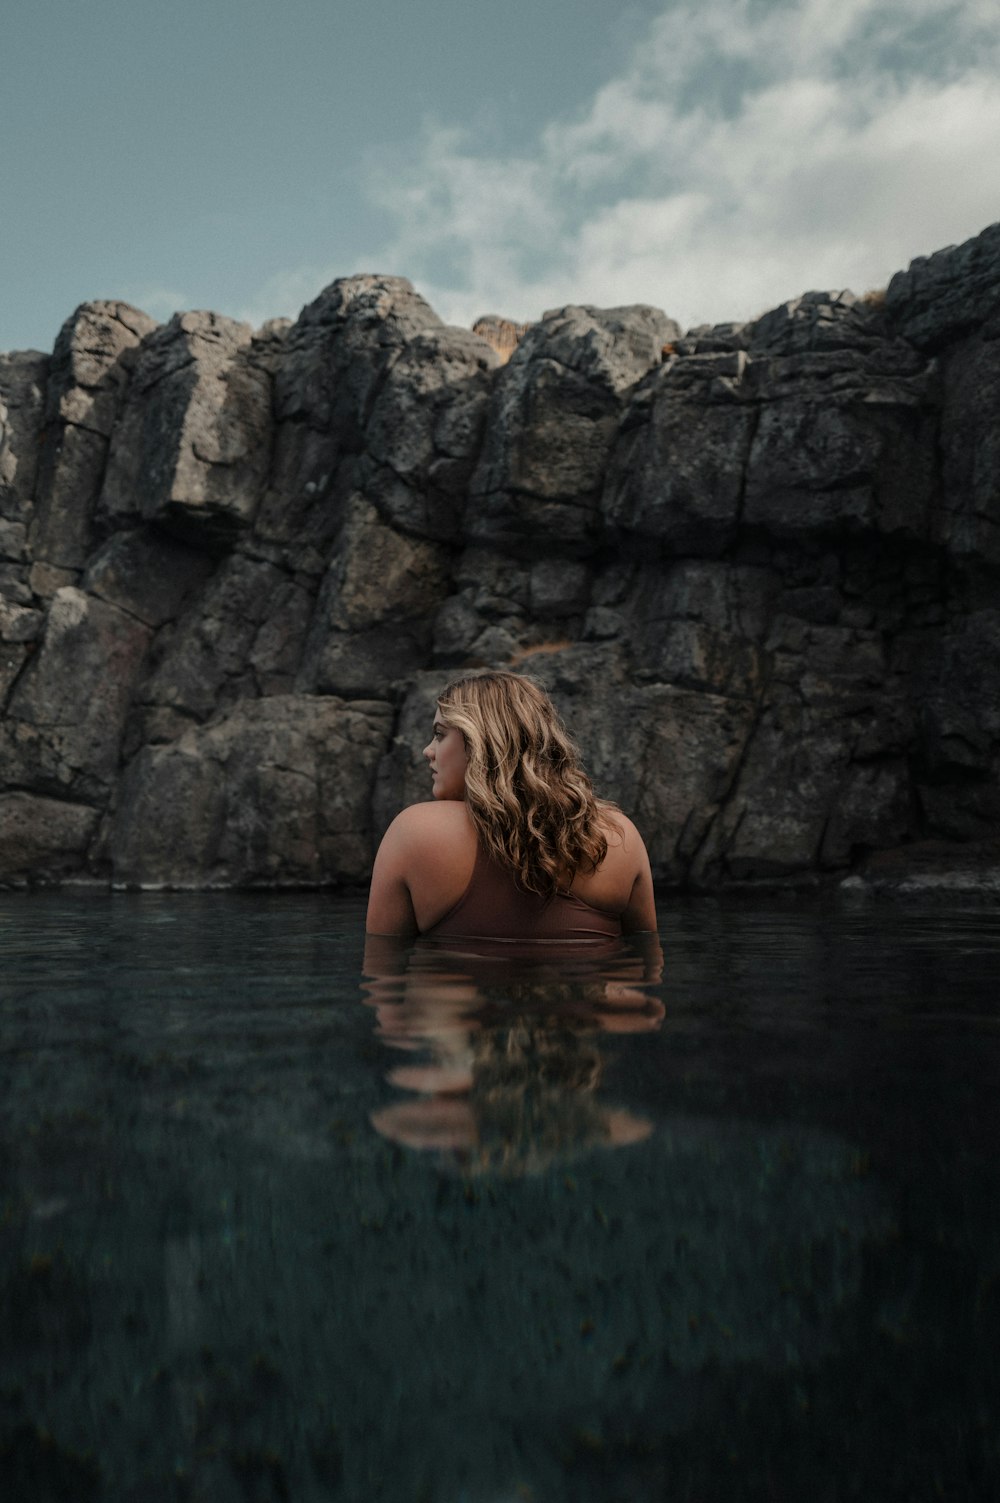 a woman in a body of water with rocks in the background